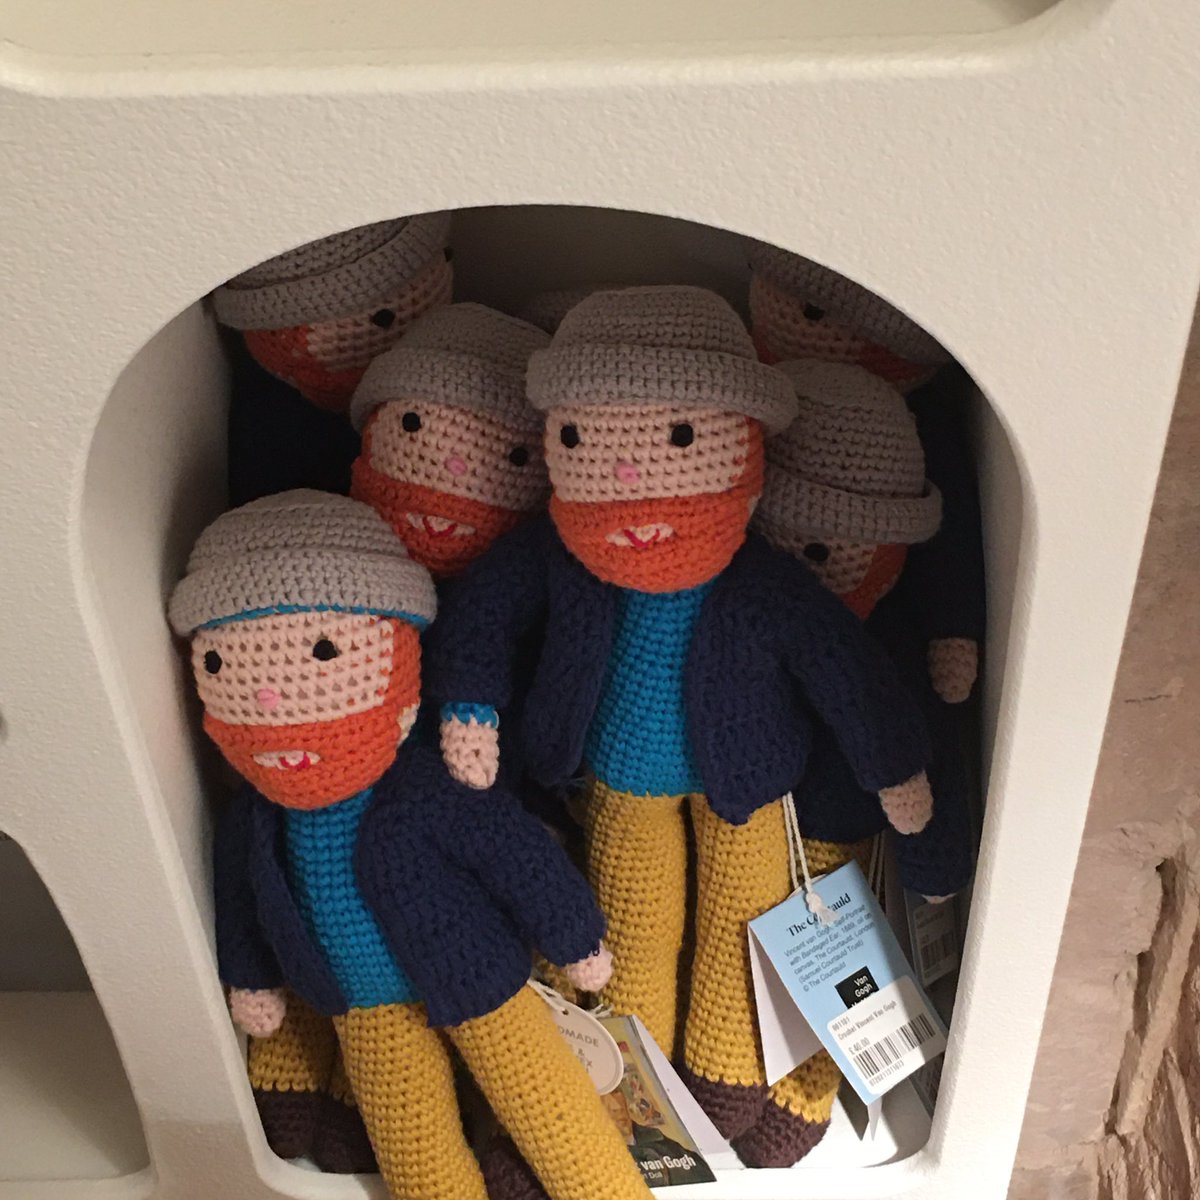 And the collective noun for knitted Vincent van Goghs is?